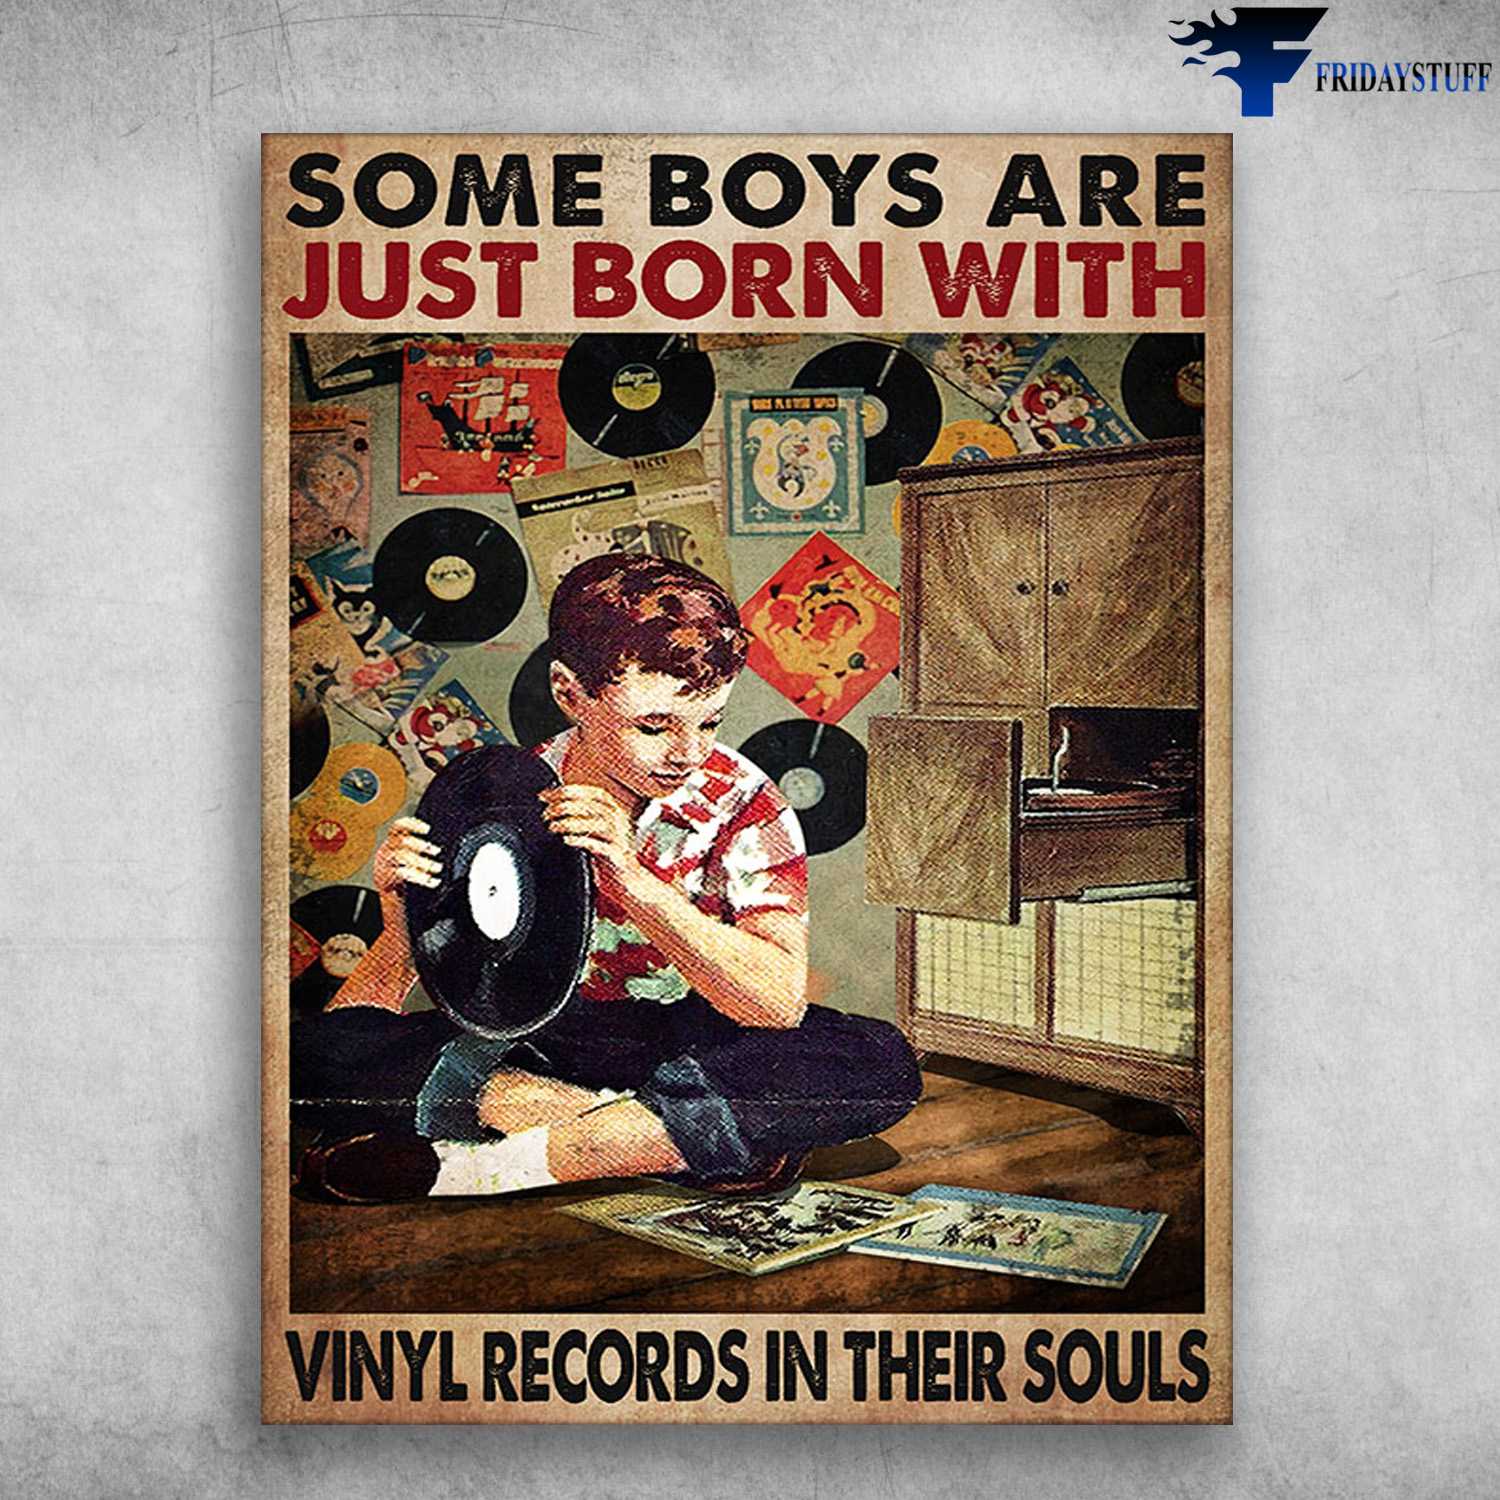 Vinyl Record, Music Lover - Some Boys Are Just Born With, Vinyl Records In Their Souls